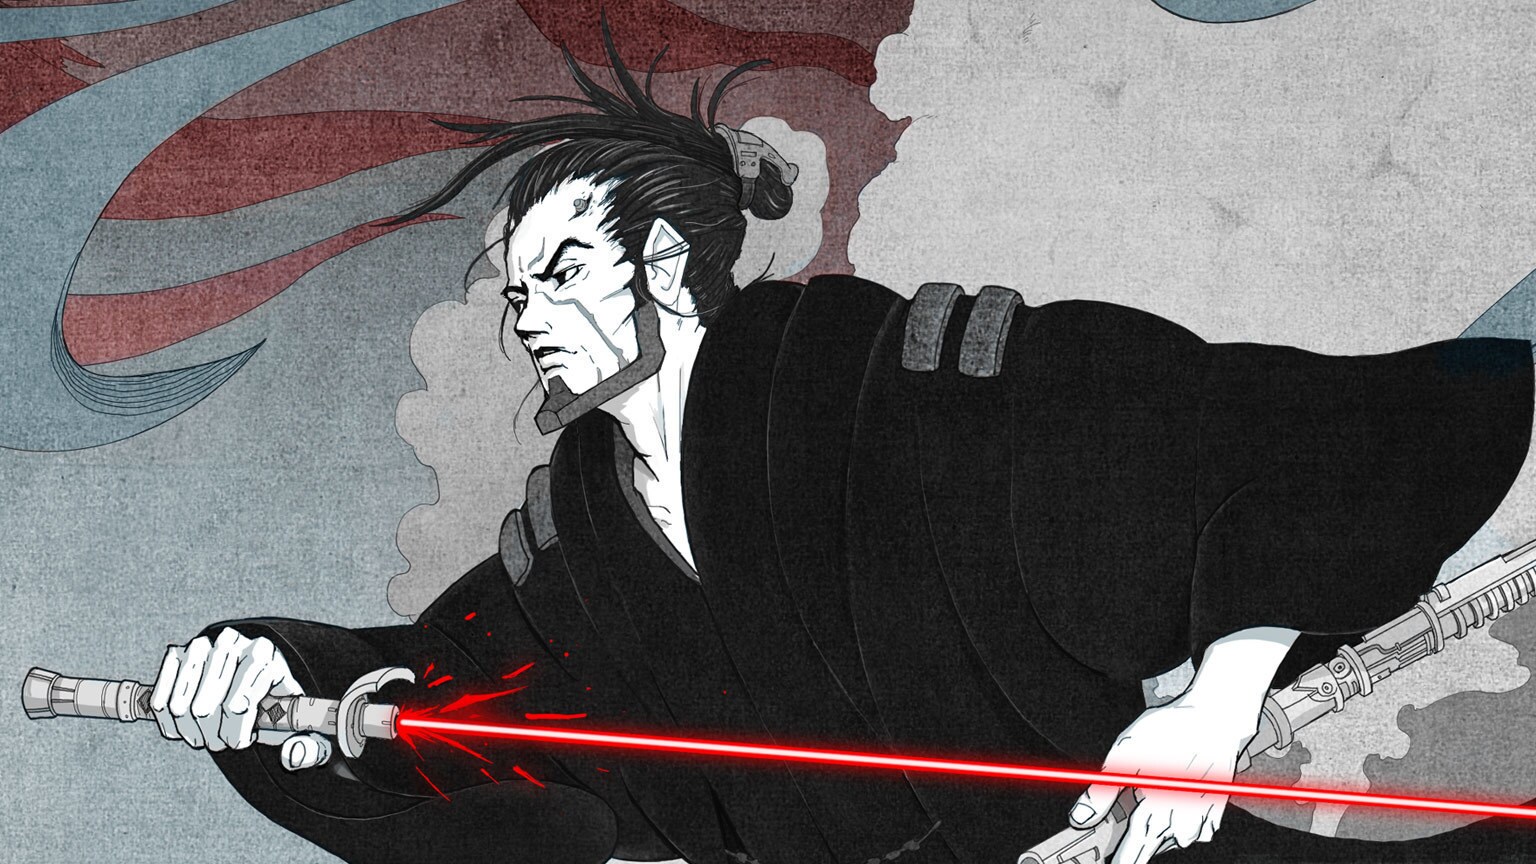 A Mysterious Former Sith Wanders the Galaxy in Ronin, the Upcoming Star Wars: Visions Novel - Exclusive Reveal